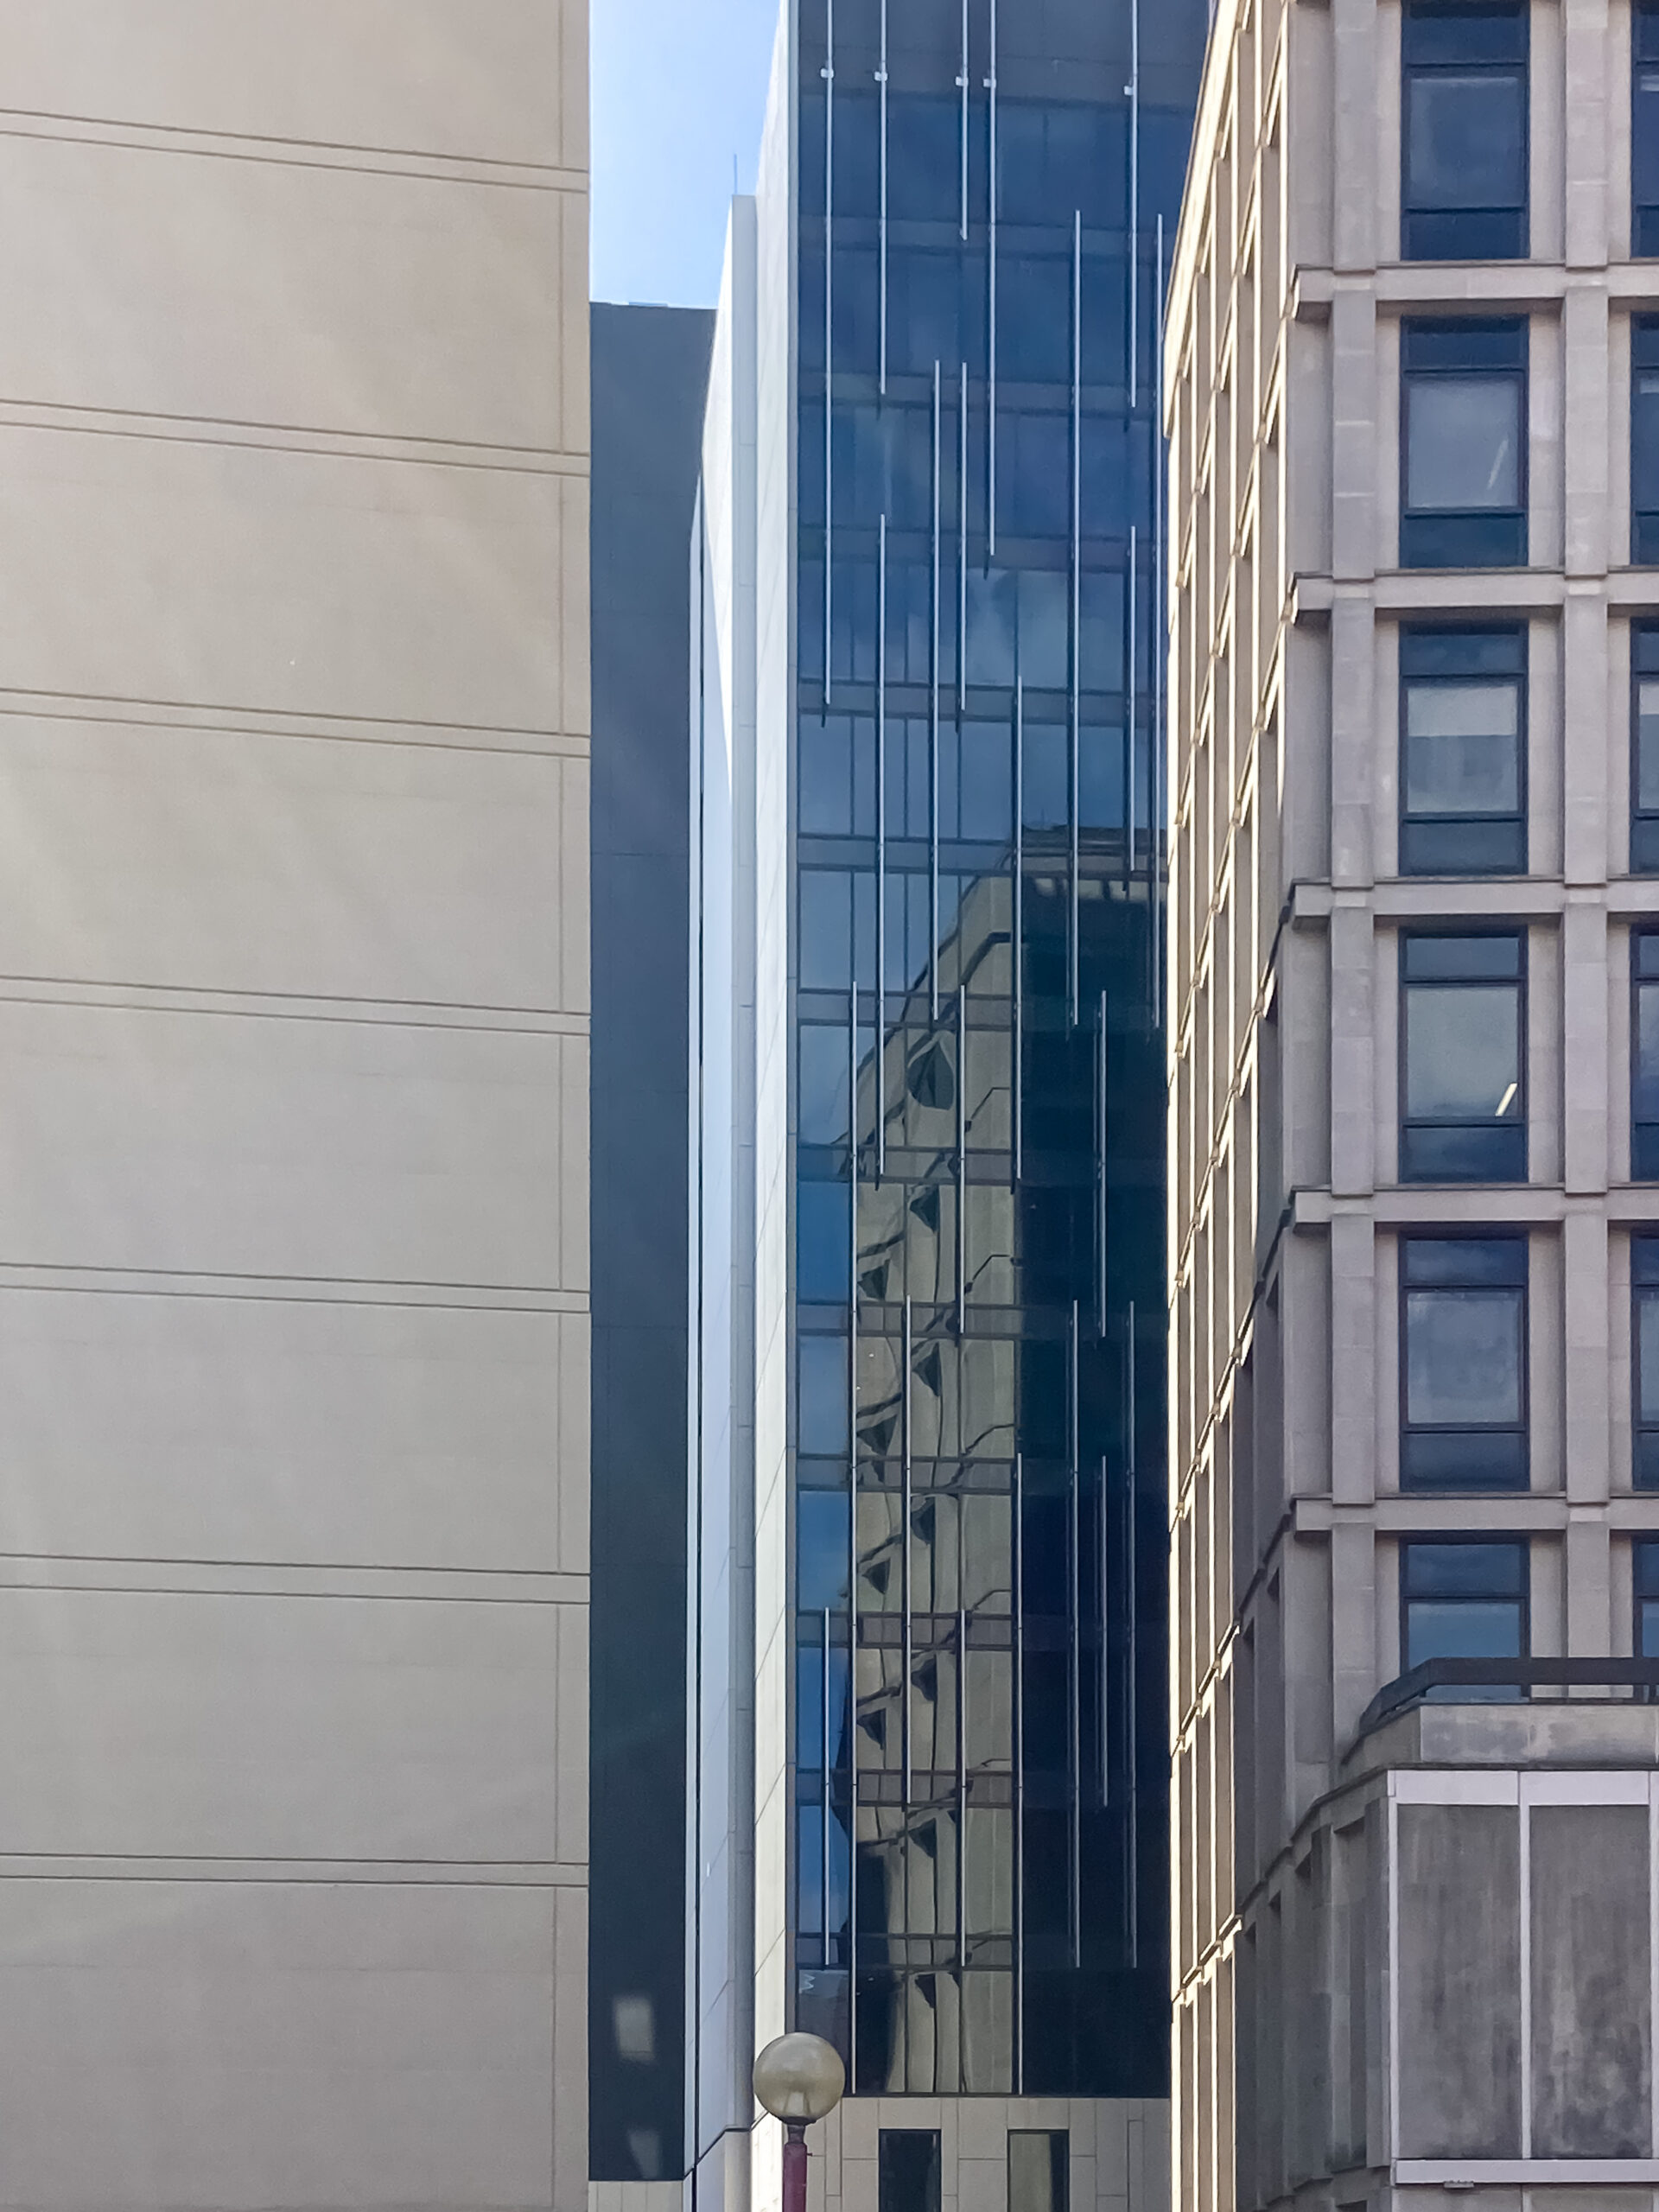 A tall brutalist building reflected in the glass wall of a nearby tall building